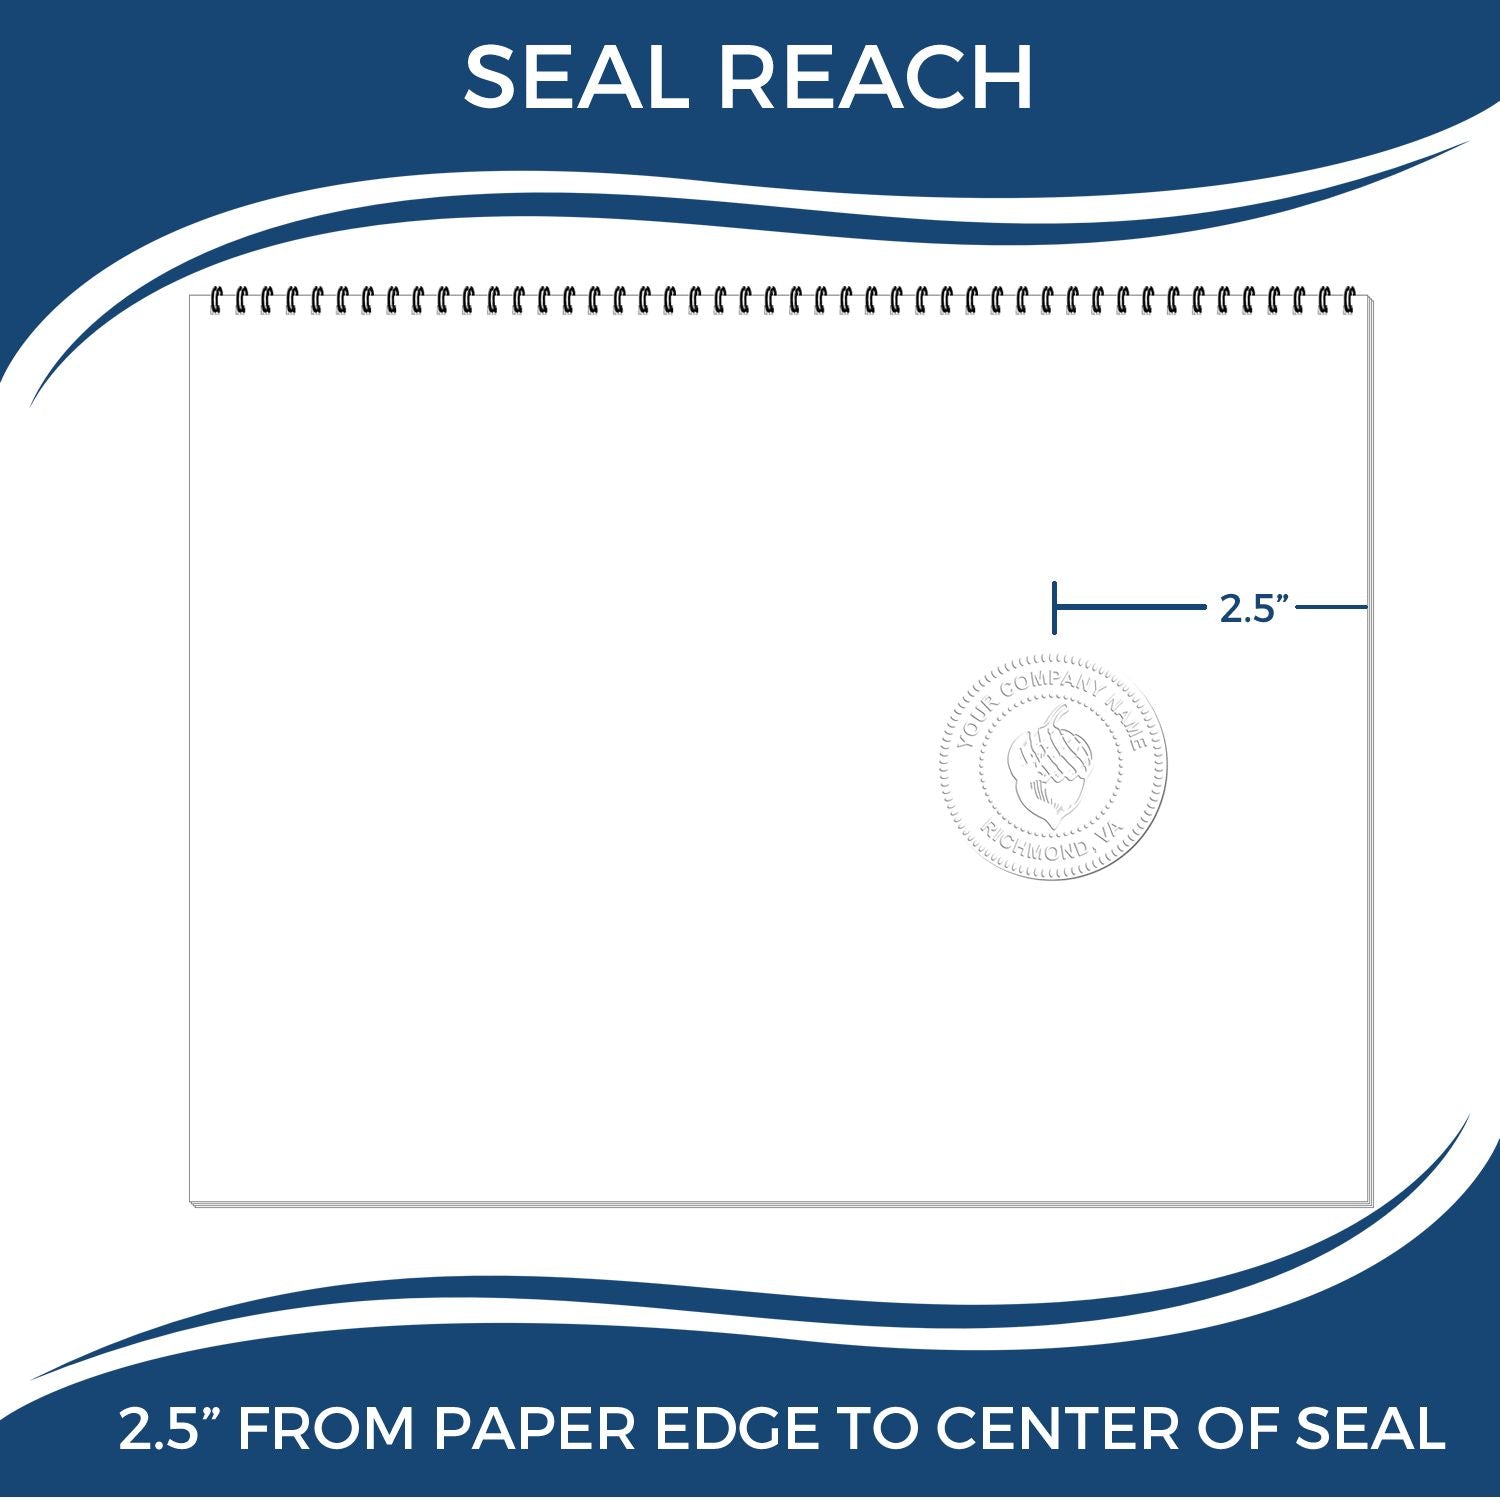 An infographic showing the seal reach which is represented by a ruler and a miniature seal image of the Heavy Duty Cast Iron Massachusetts Geologist Seal Embosser